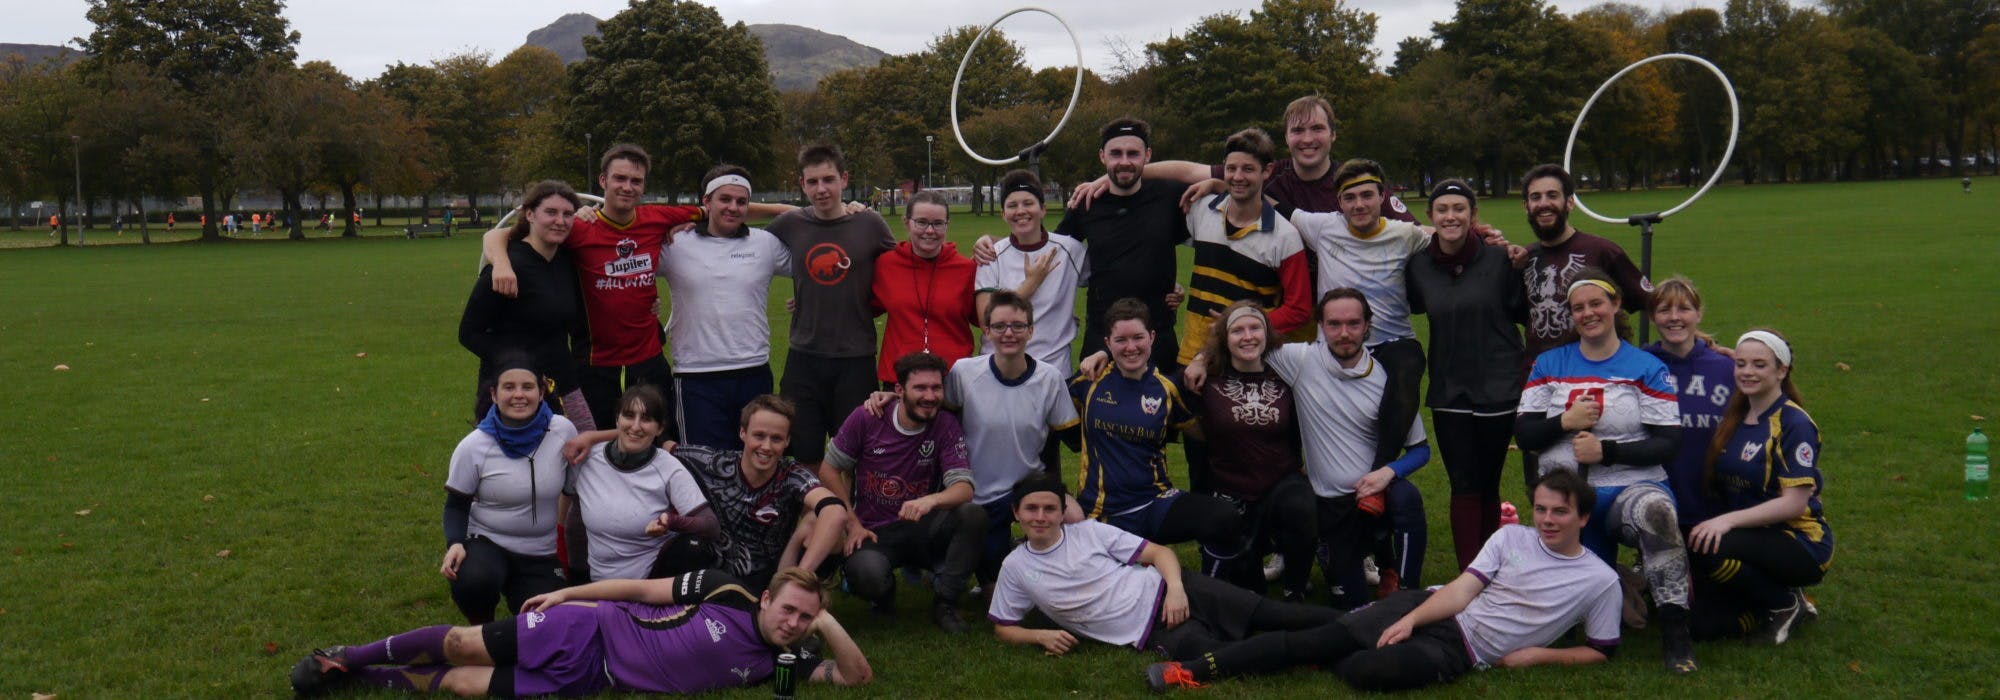 Large group of scottish quidditch players meeting up for the Scottish national team tryouts in large field.